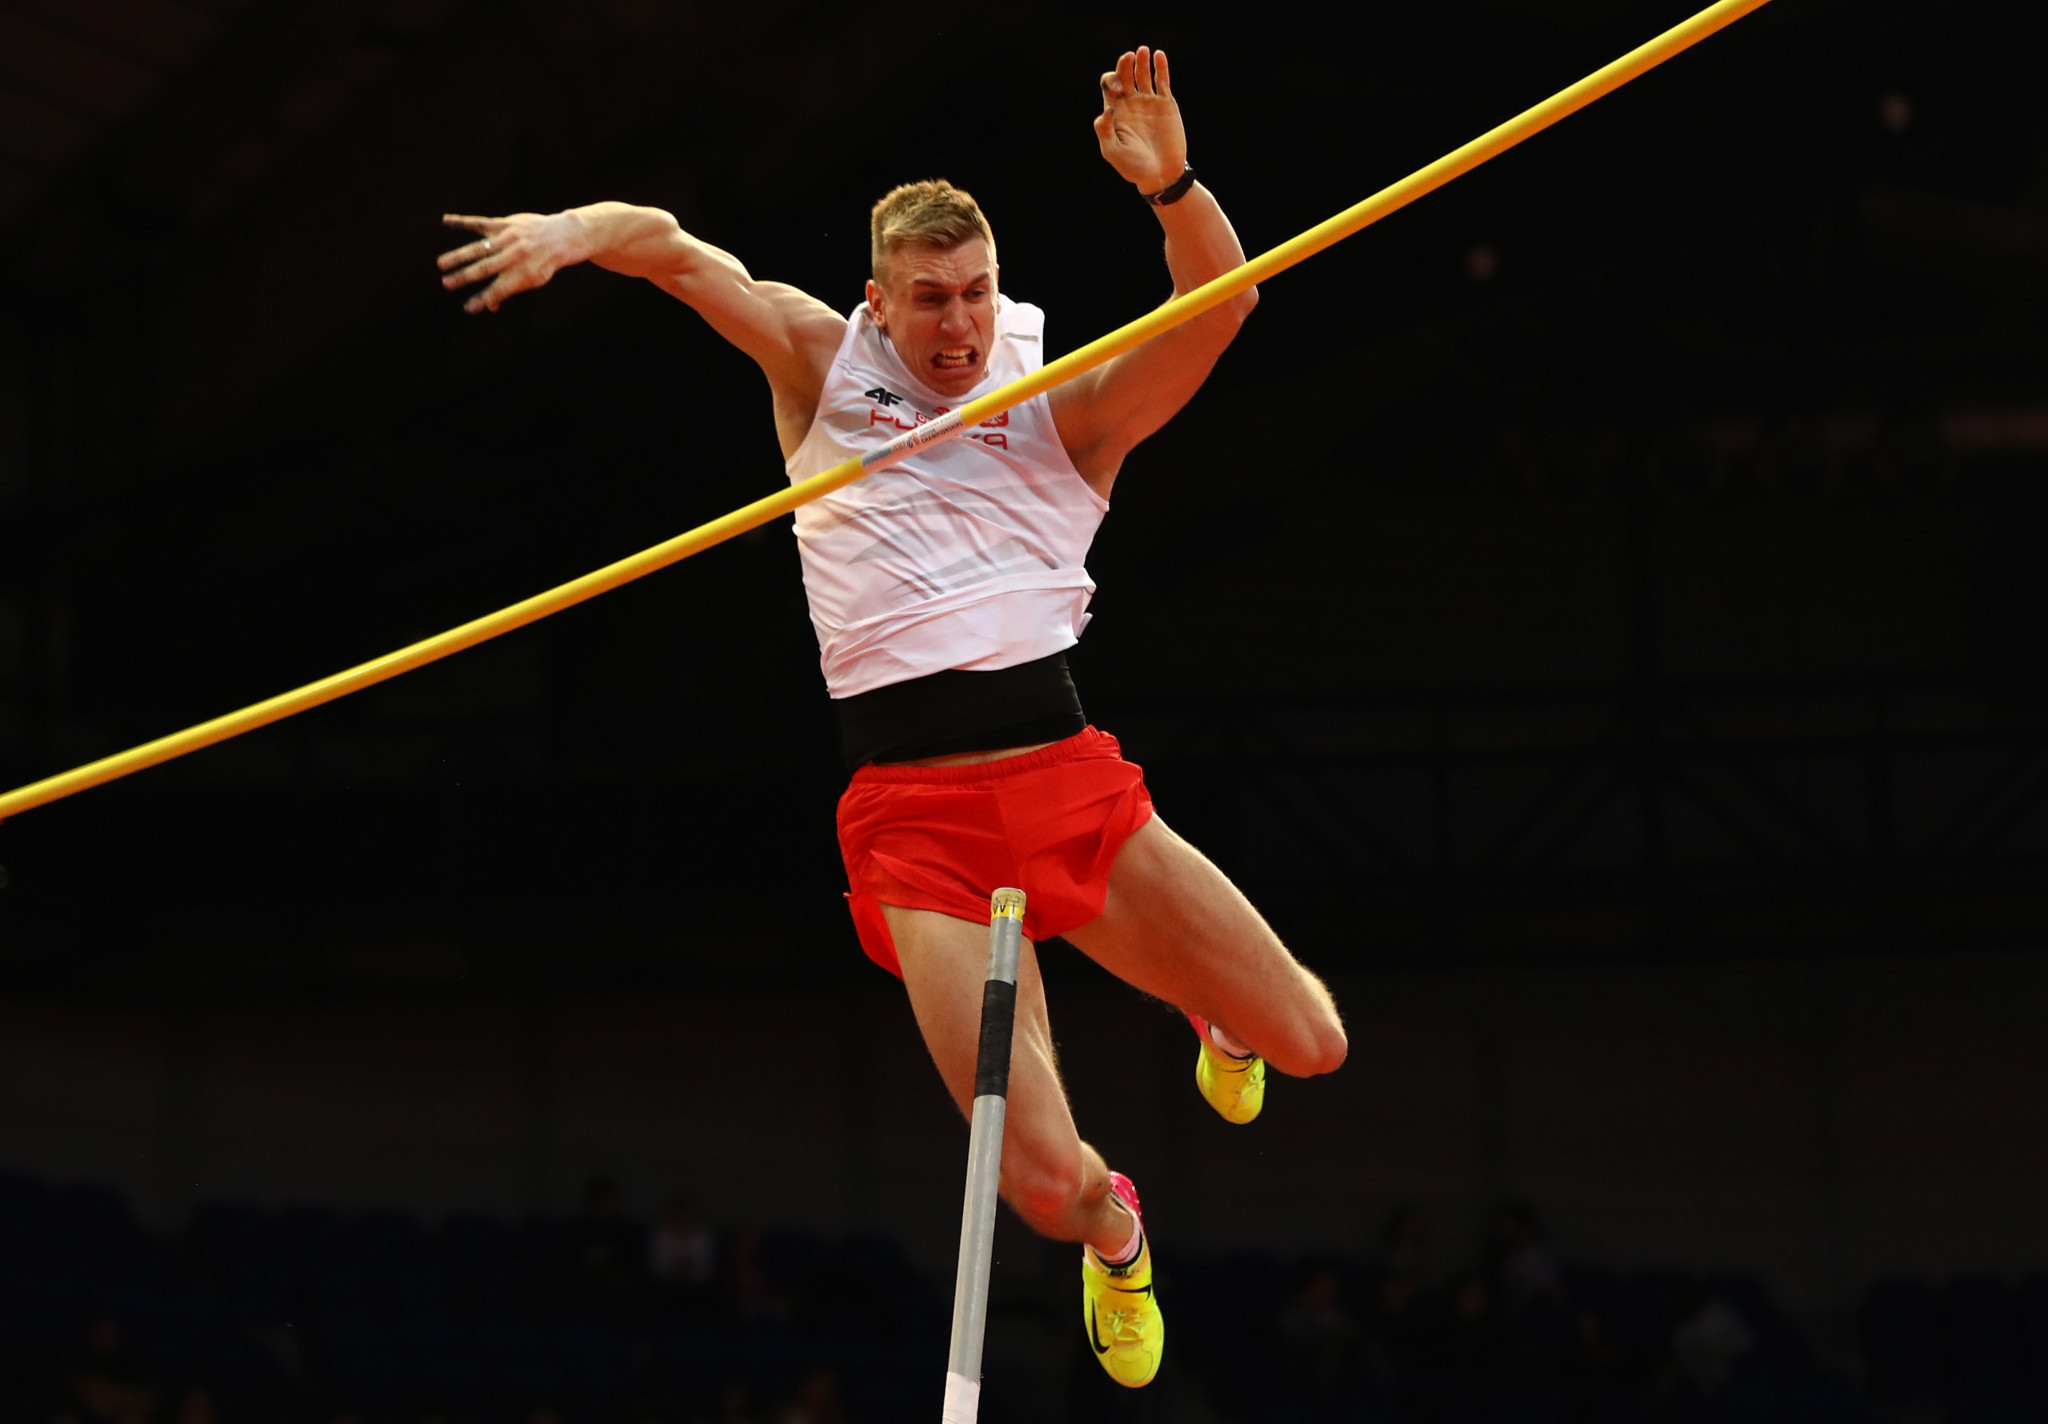 Lisek clinches pole vault title on home soil at IAAF World Indoor Tour